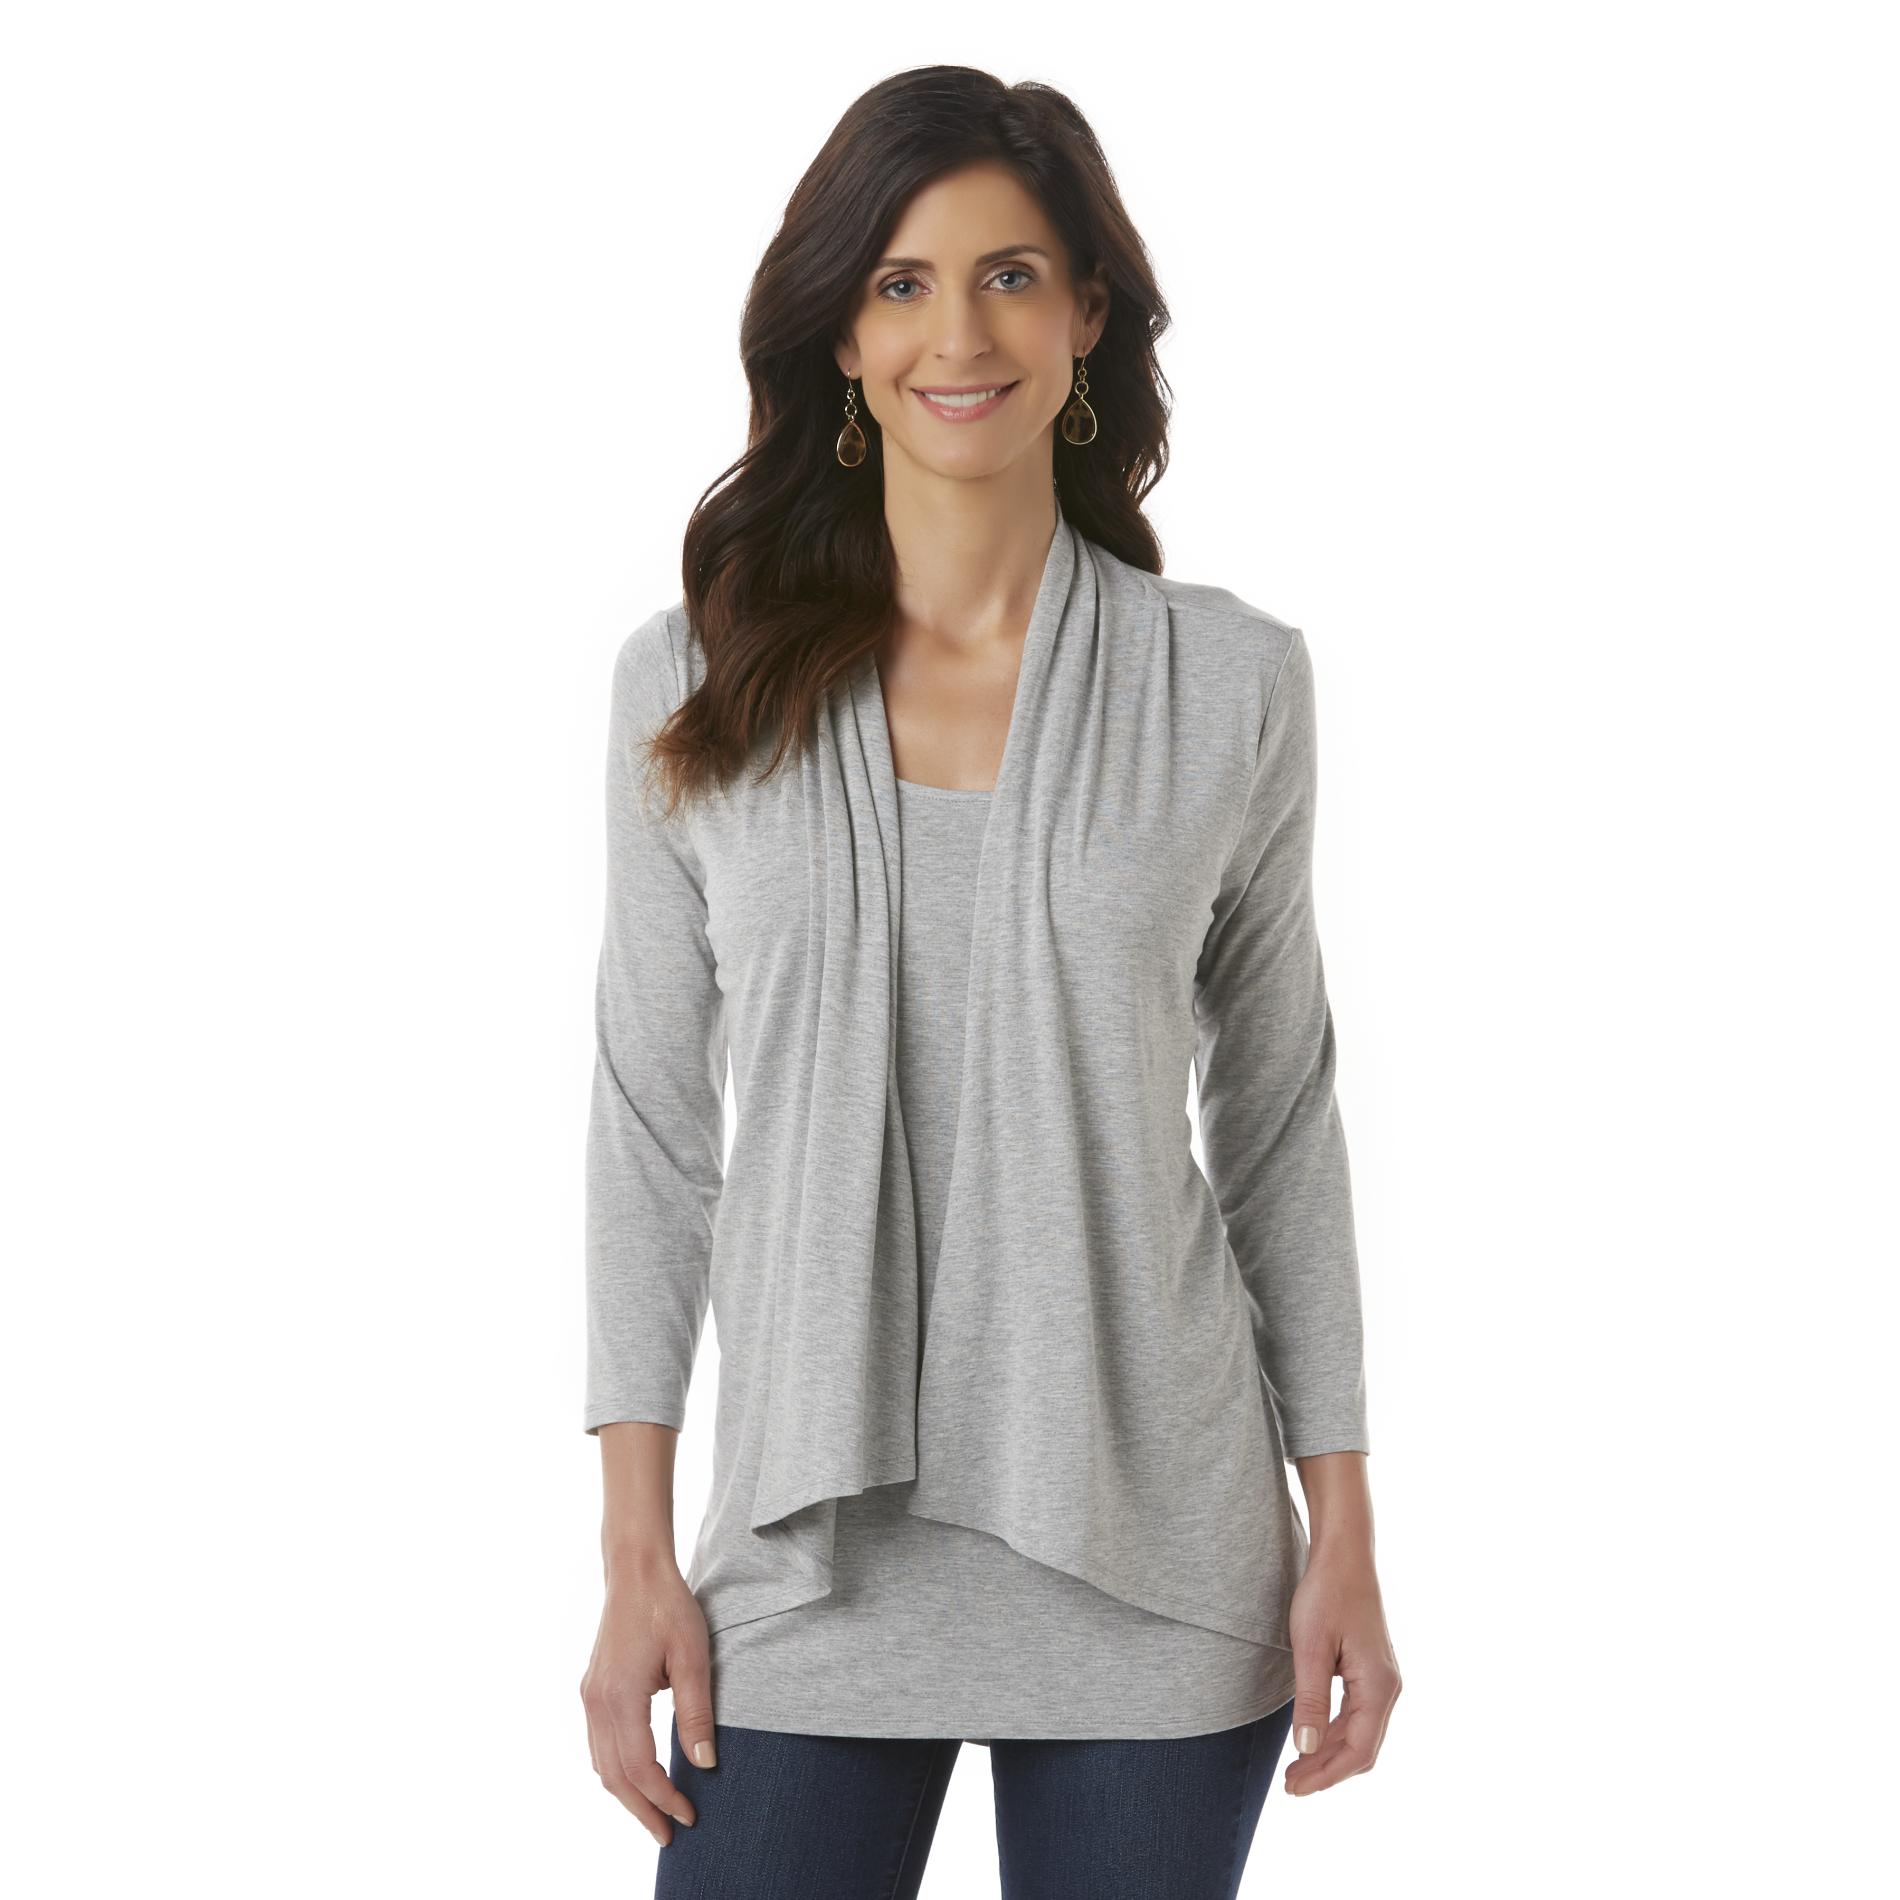 Jaclyn Smith Women's Layered-Look Top